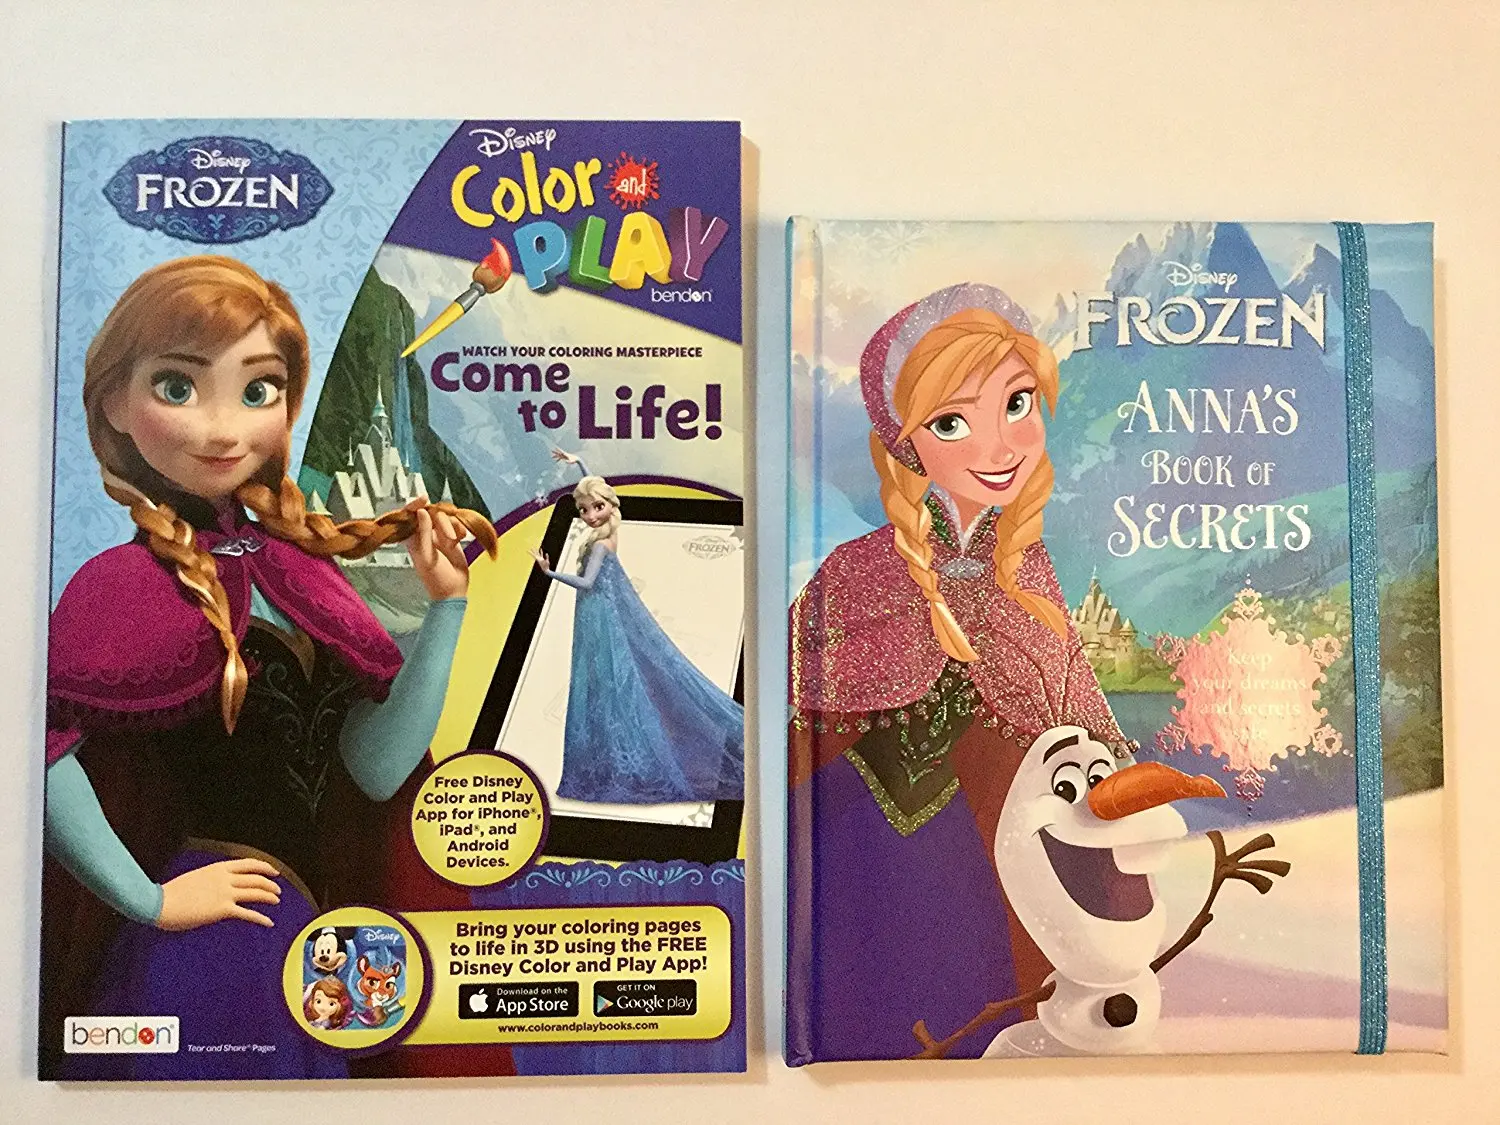 Download Buy Disney Frozen Coloring Book With 3d Feature Via Free App And Annas Book Of Secrets Memory Book Bundle In Cheap Price On Alibaba Com